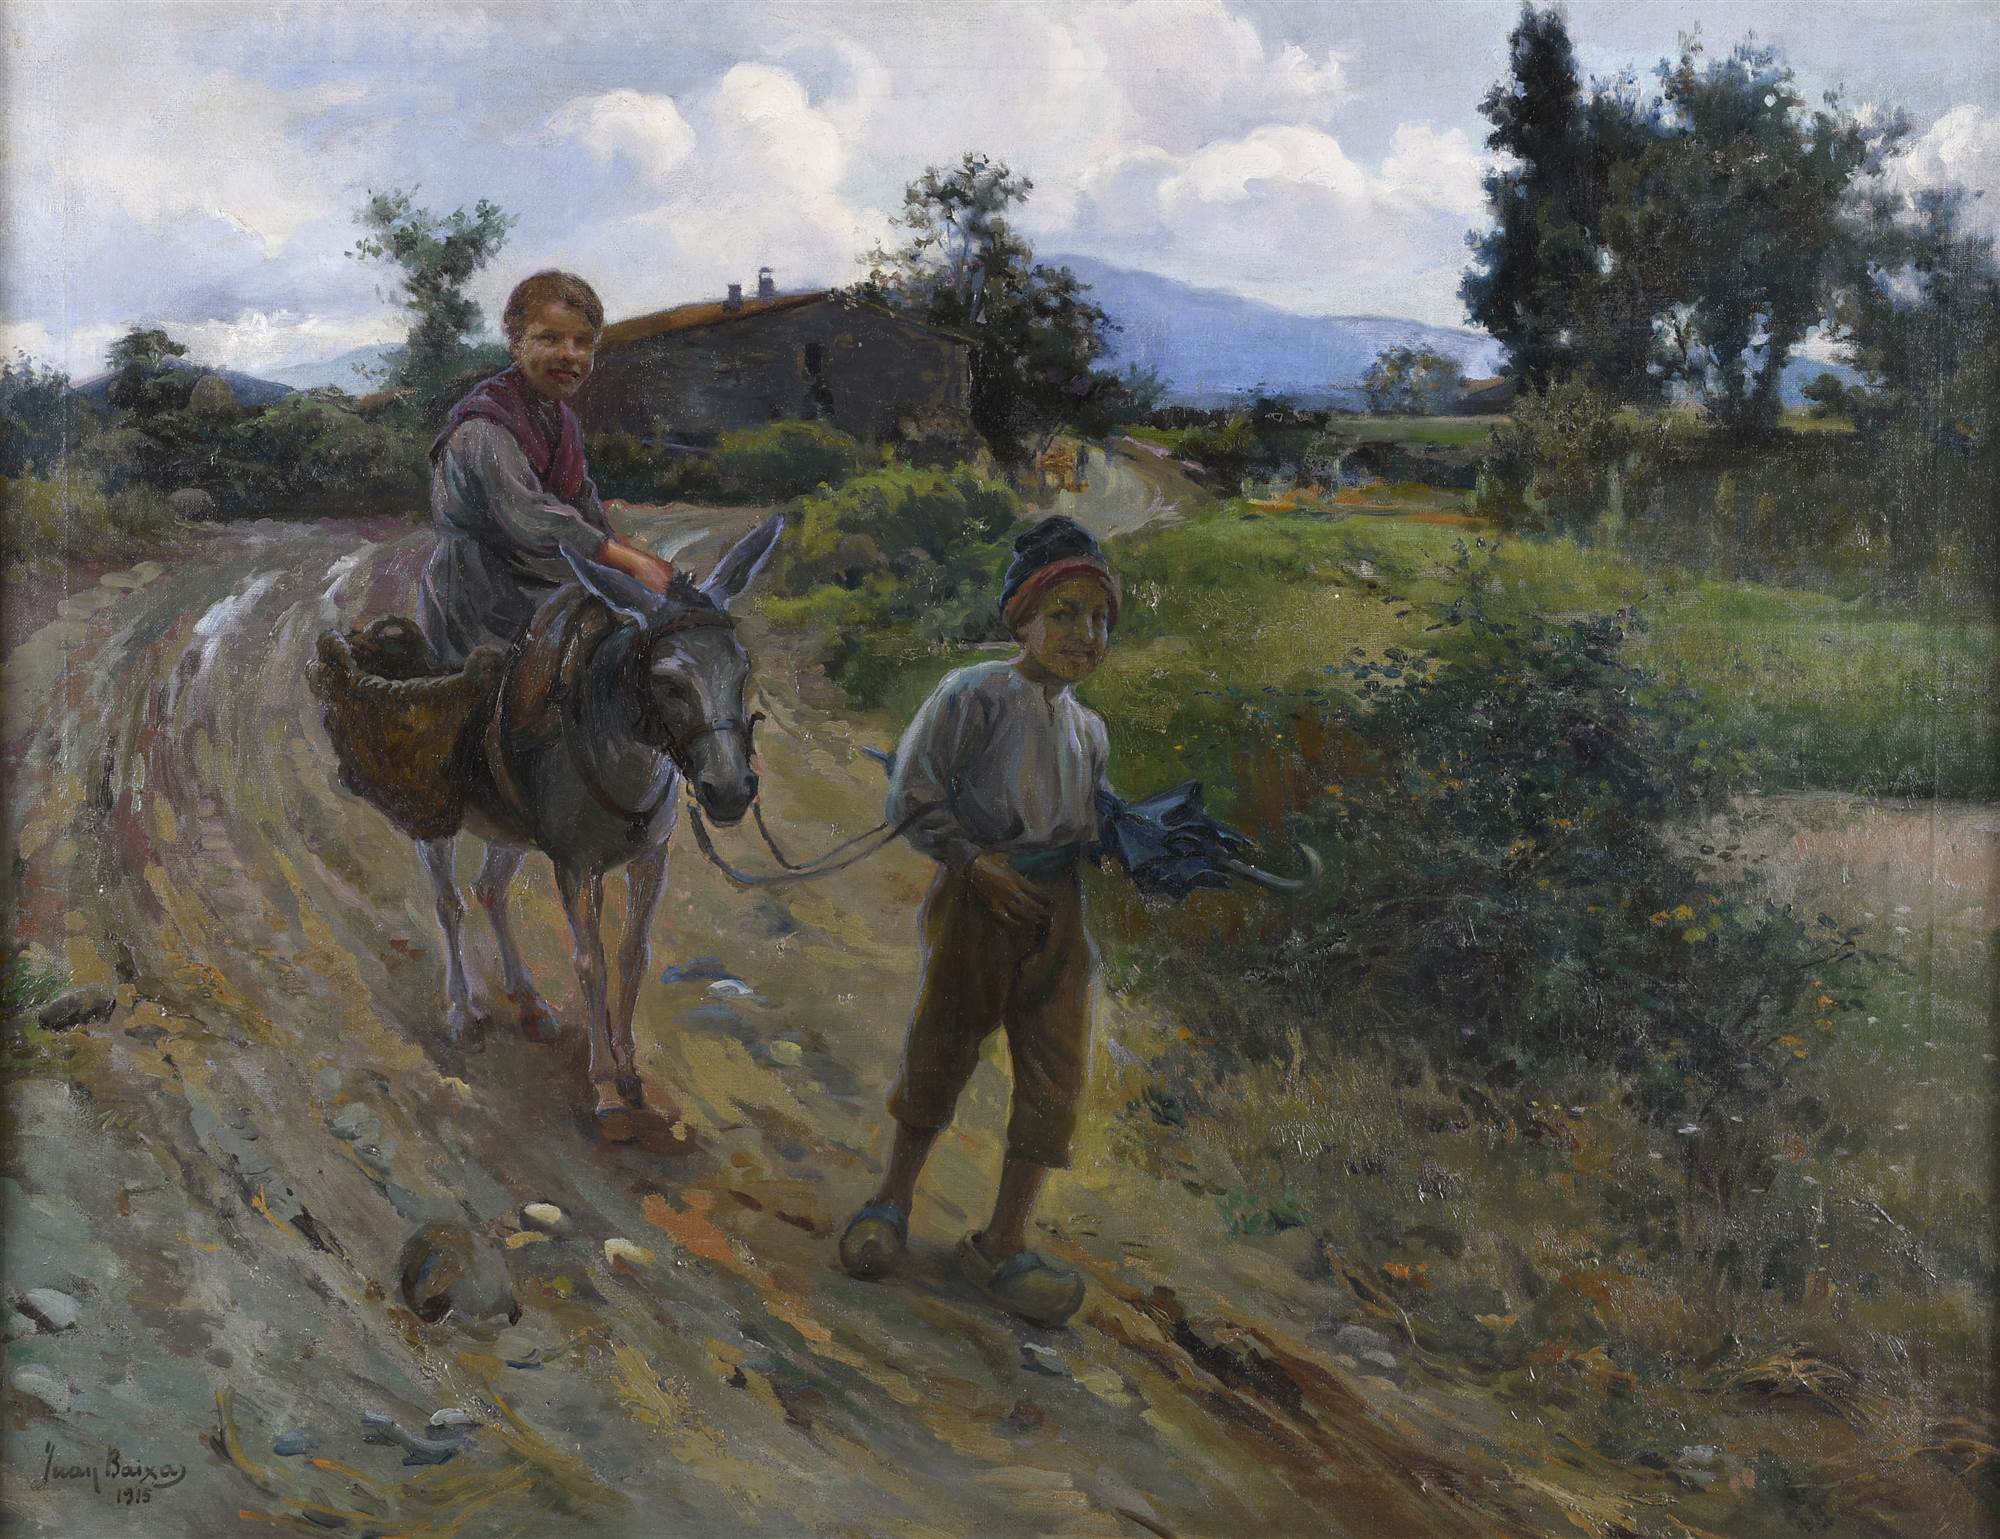 JOAN BAIXAS I CARRETER (1863-1925). "CHILDREN WITH A DONKEY